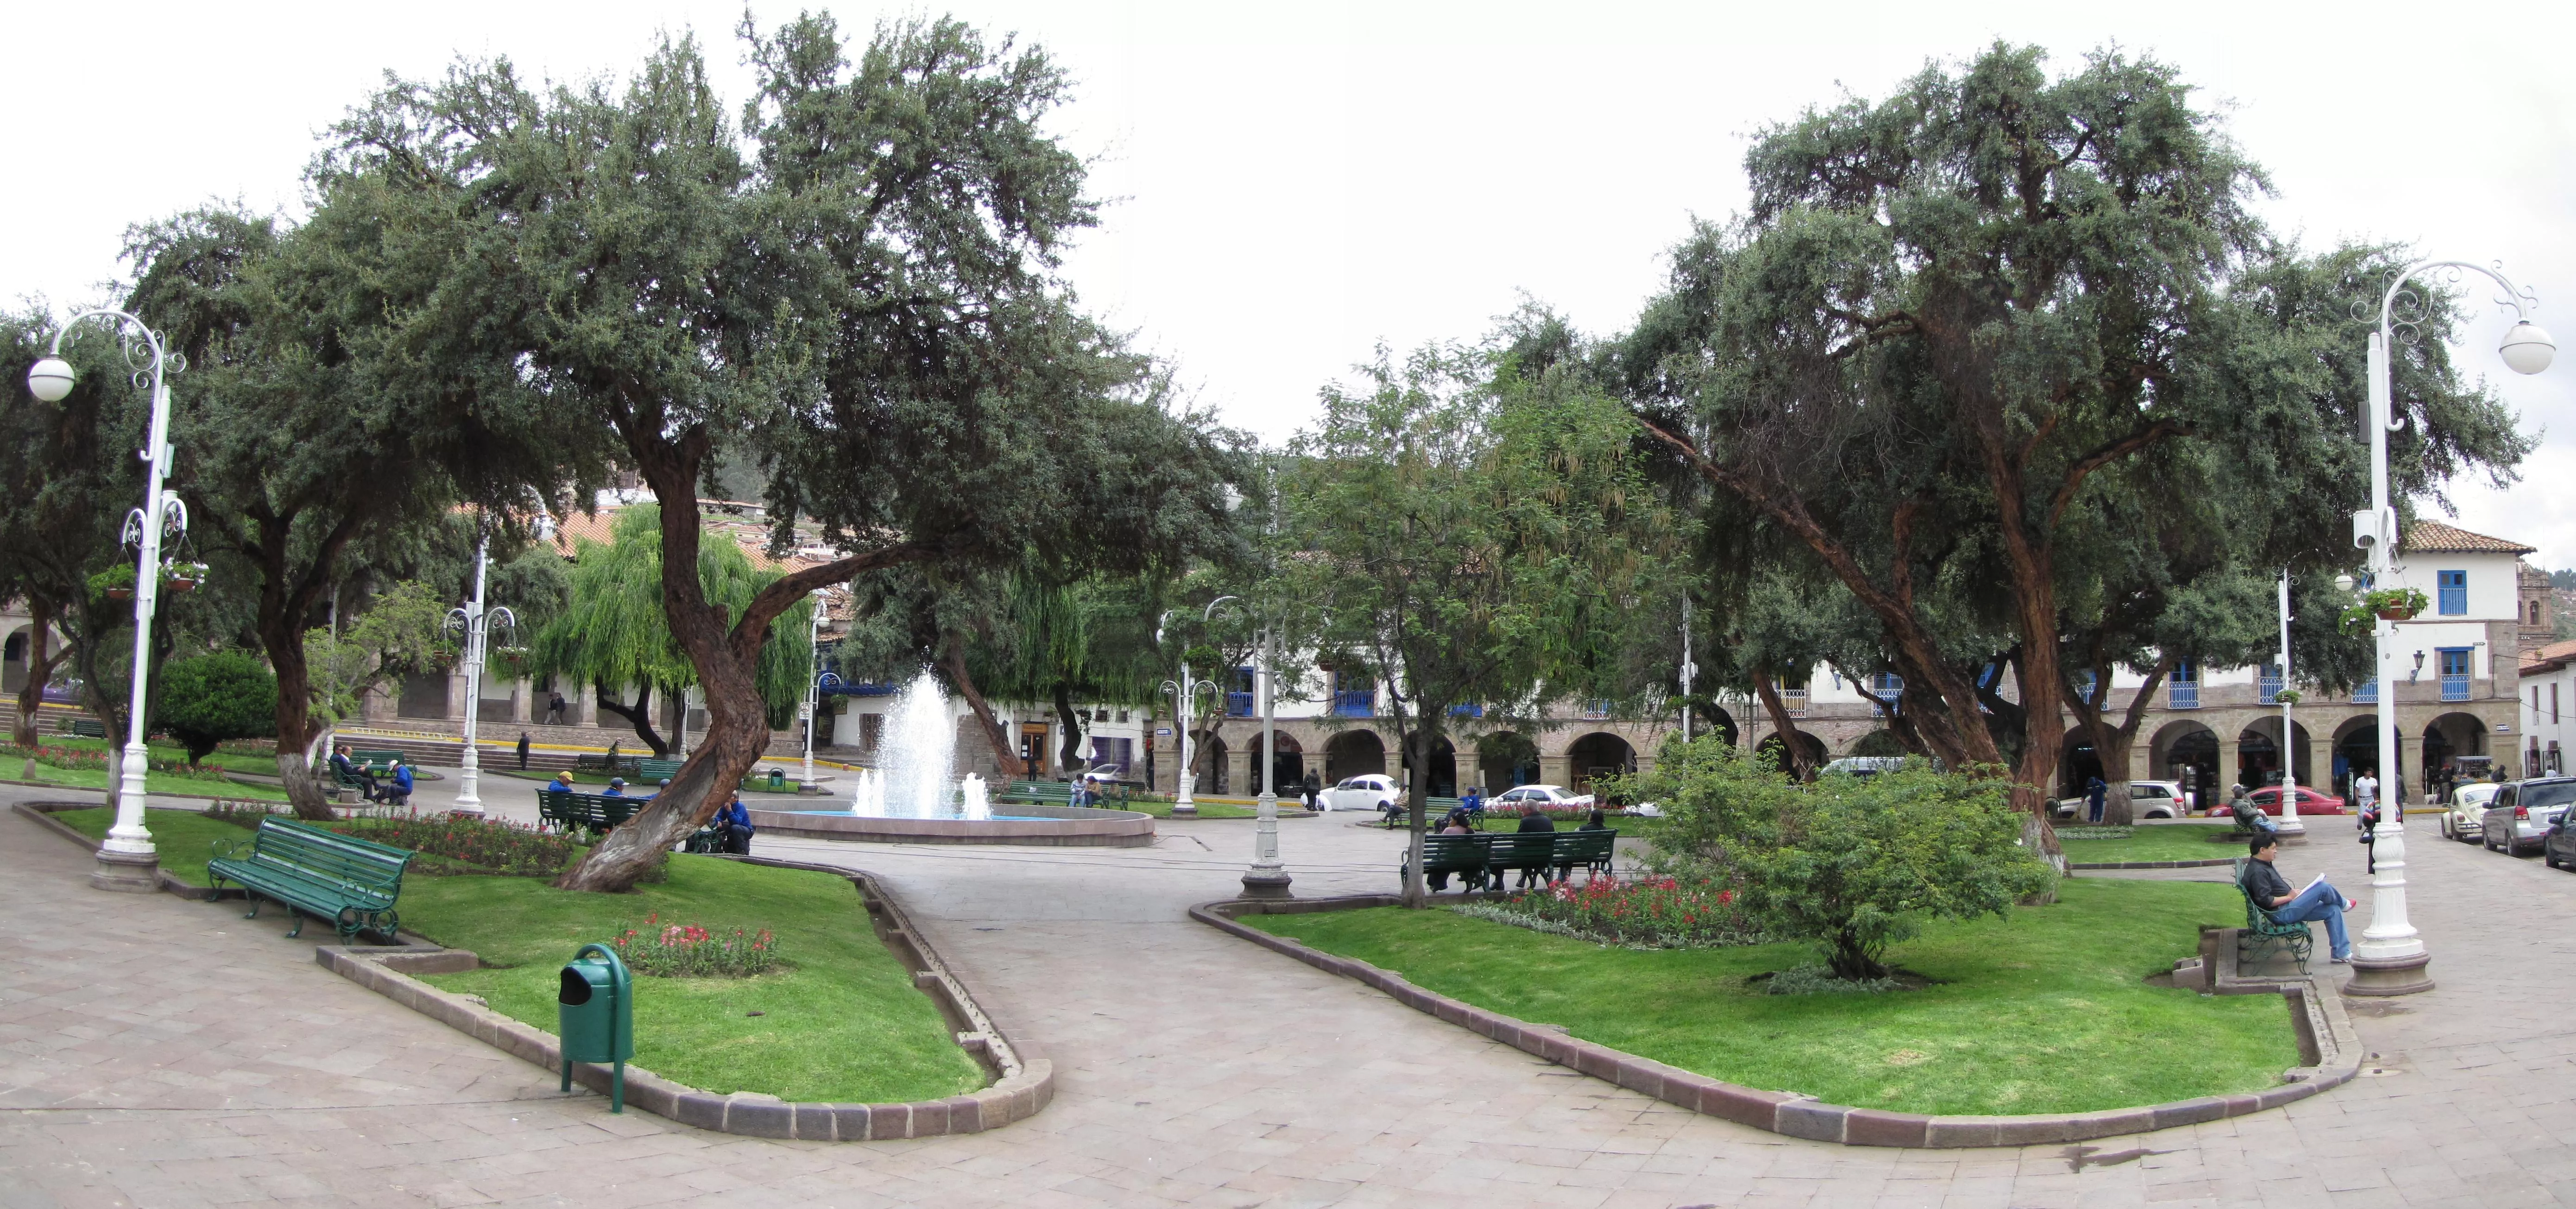 Plaza Kusipata in Peru, South America | Parks - Rated 3.6